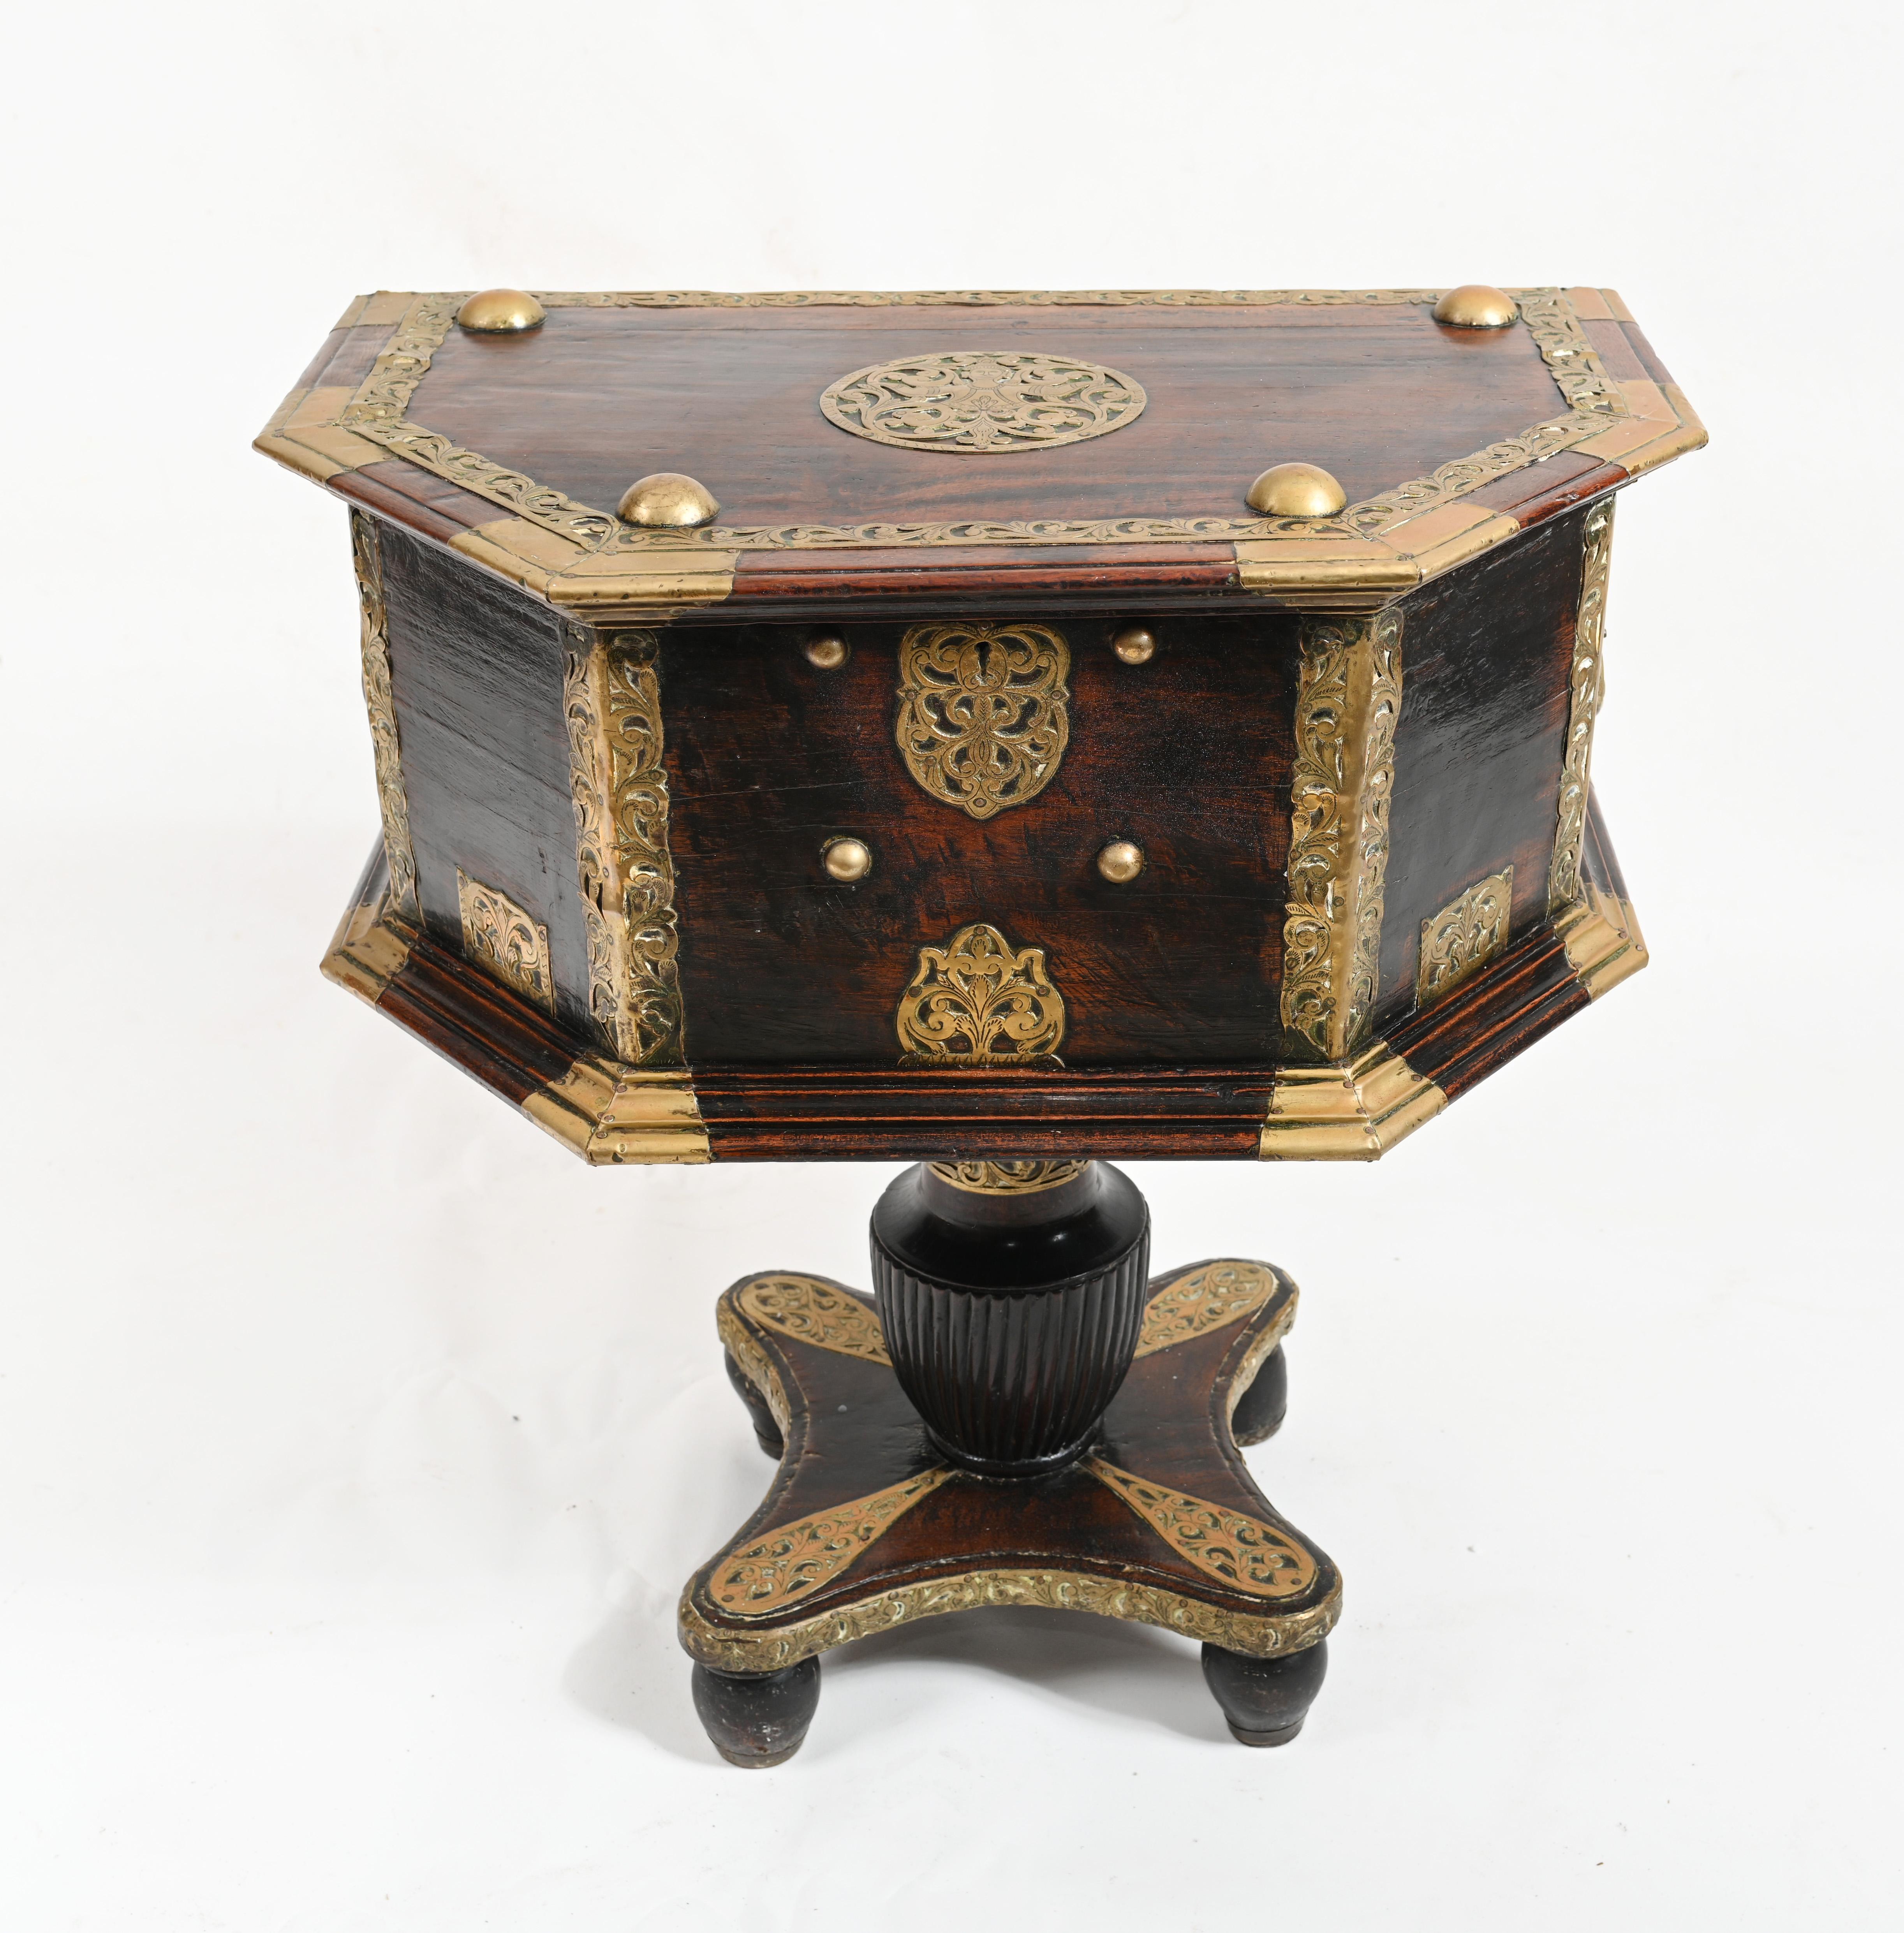 A large dowry chest from the Indian sub continent.
In rosewood embellished with finely casted brass fittings.
Great collectors piece and could function as a side table or cabinet.
Brass fixtures very ornate and features a Hindhu